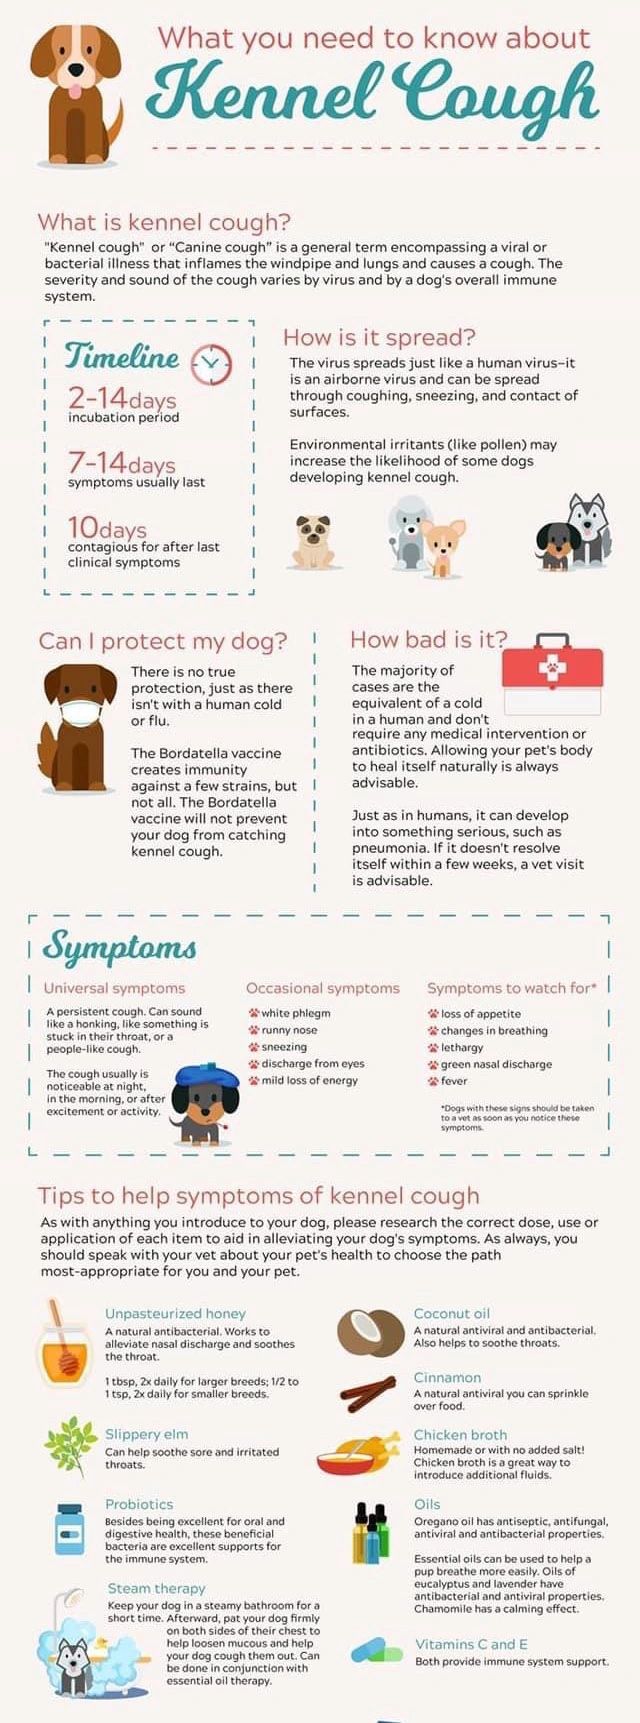 are dog colds contagious